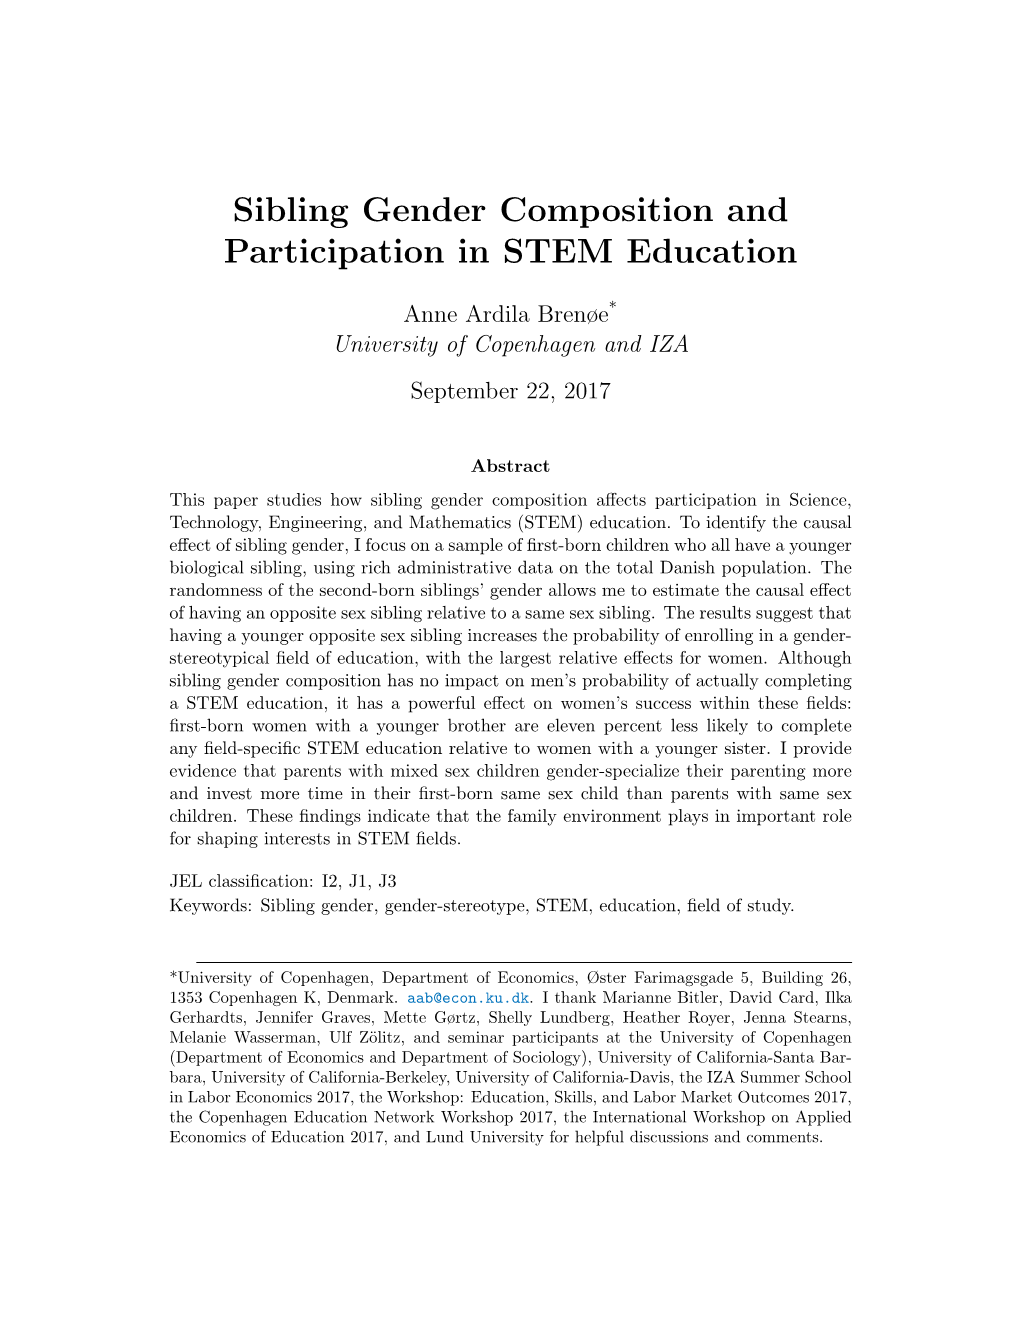 Sibling Gender Composition and Participation in STEM Education